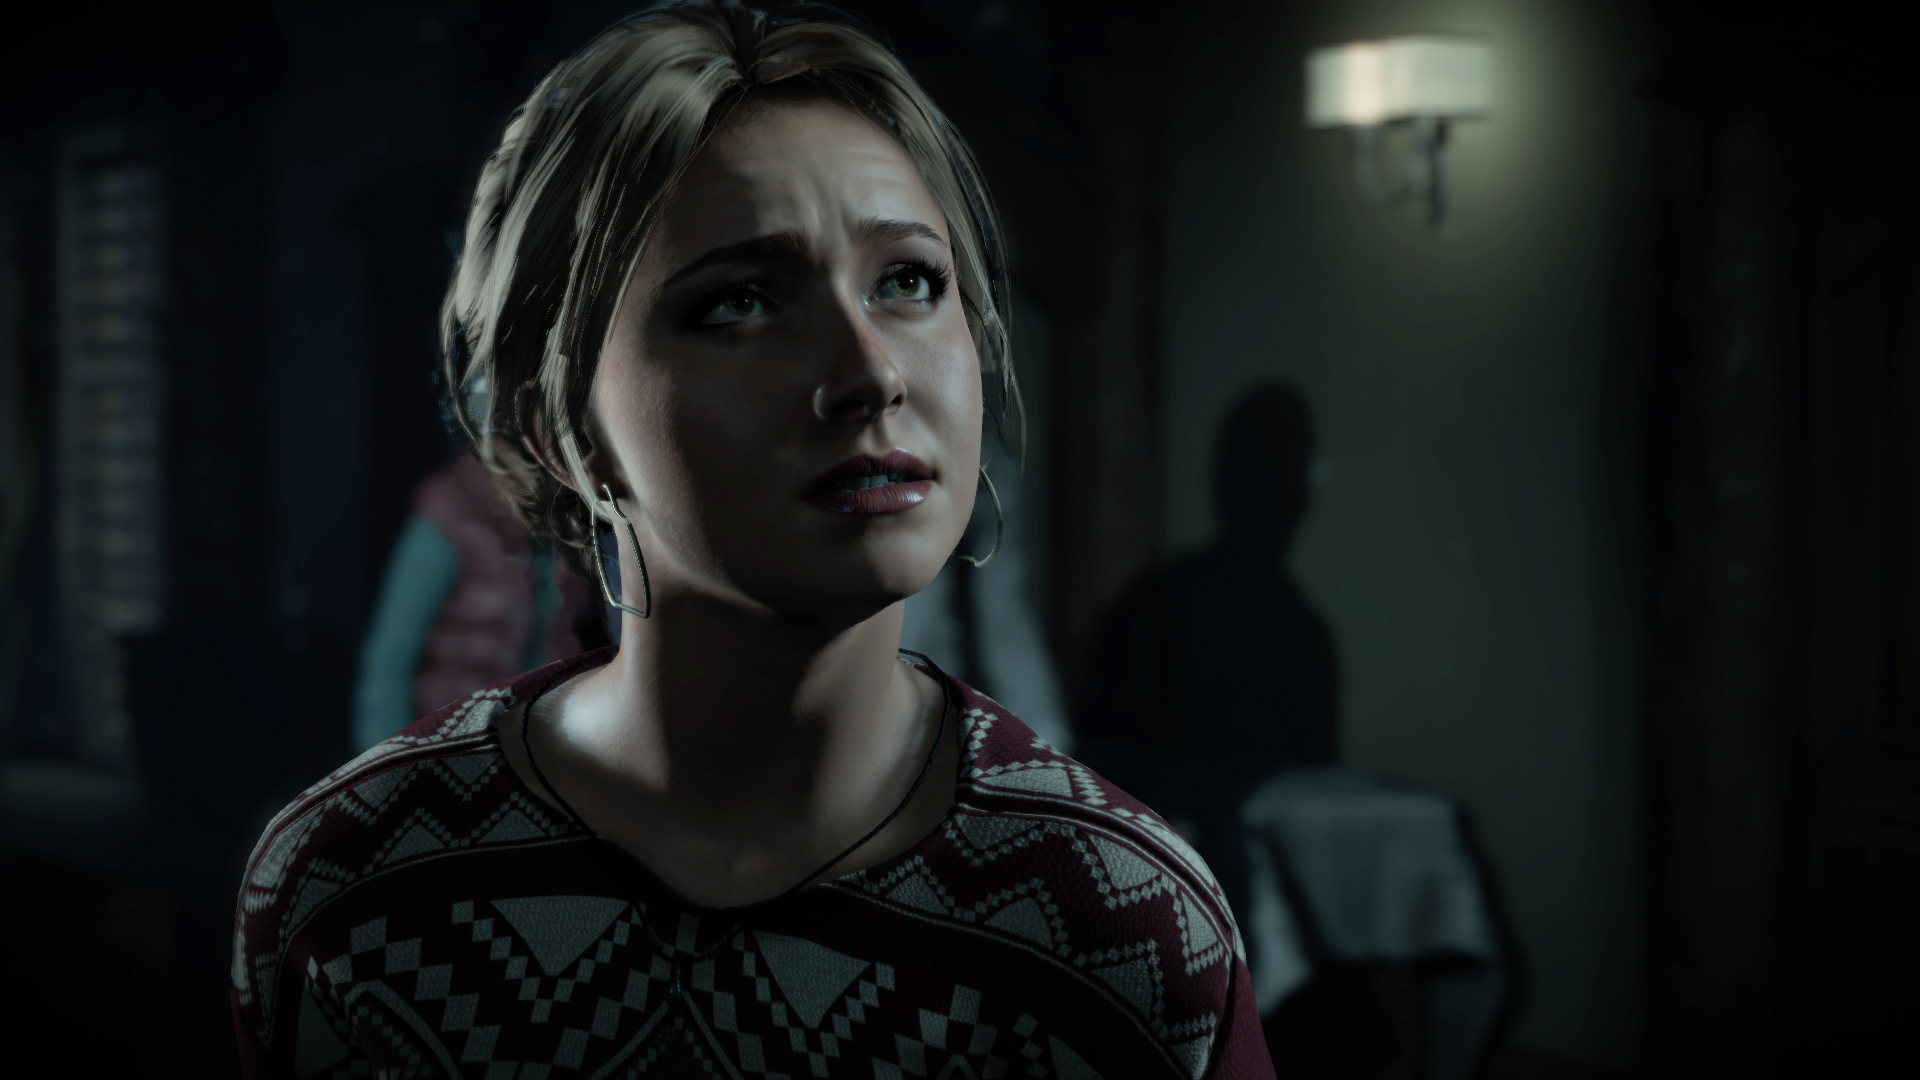 Nice Images Collection: Until Dawn Desktop Wallpapers